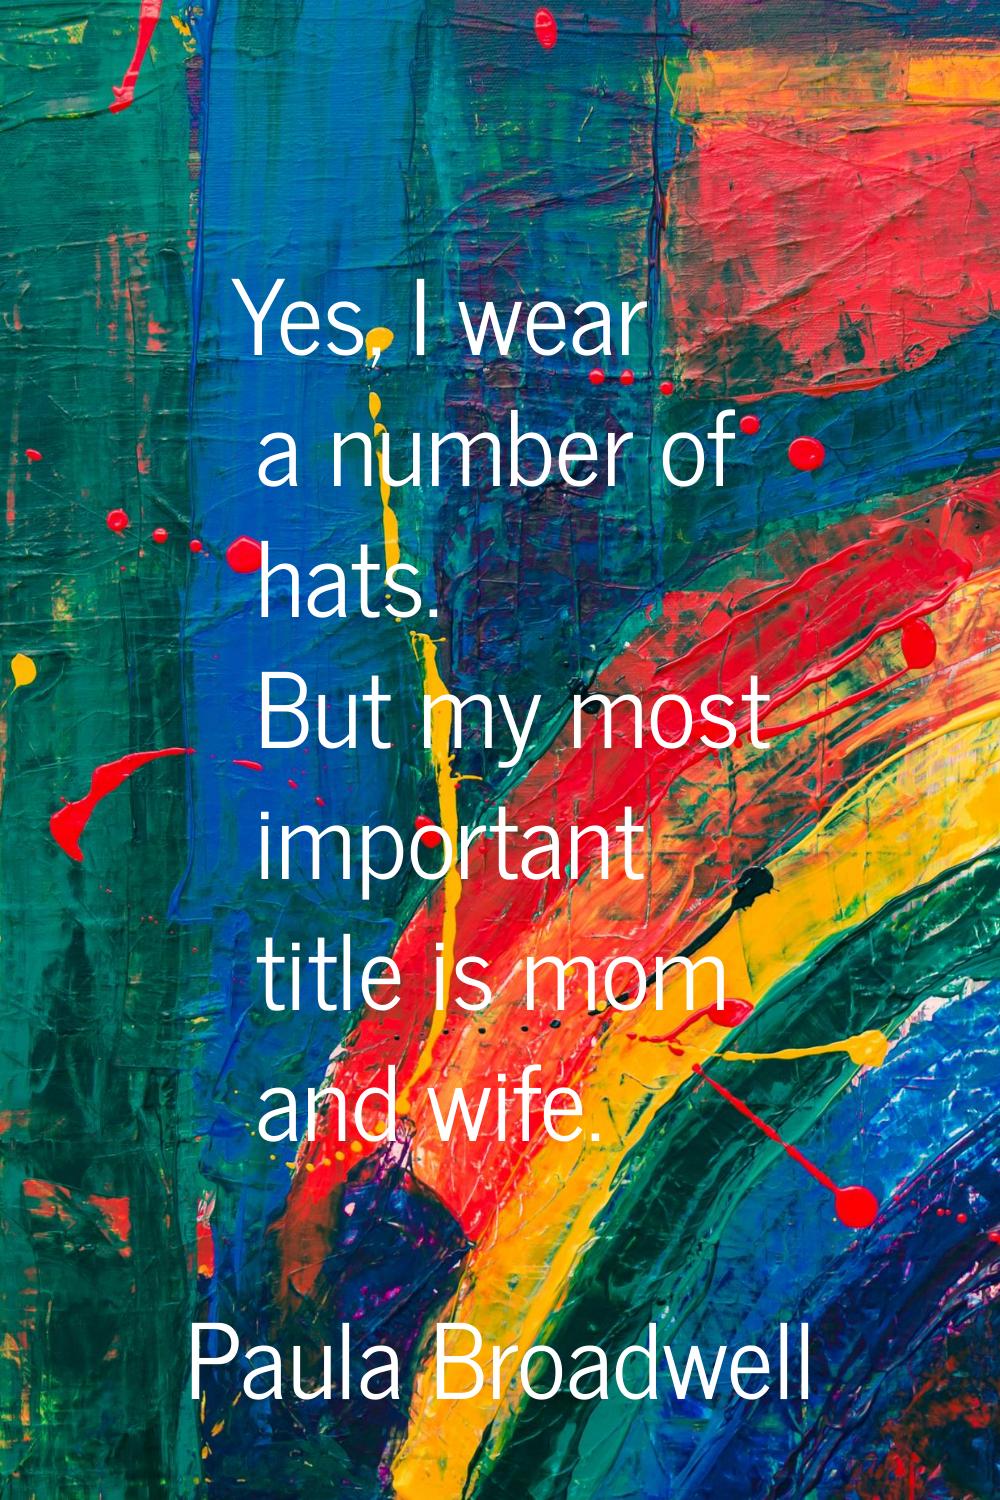 Yes, I wear a number of hats. But my most important title is mom and wife.